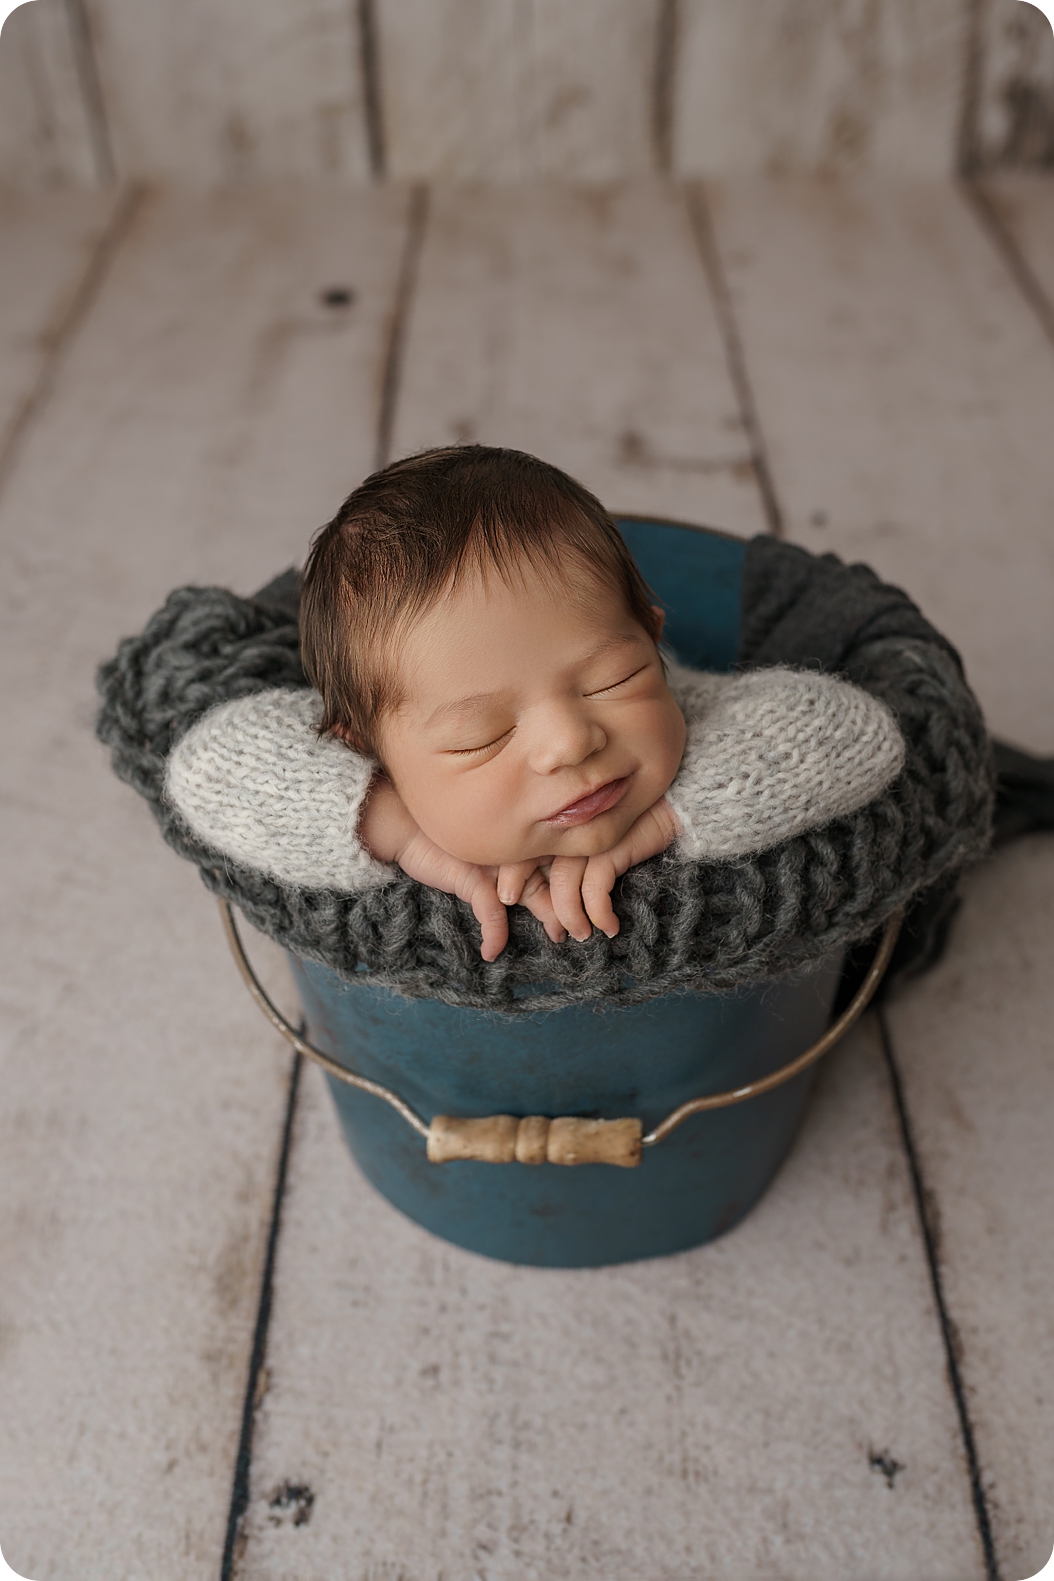 baby sleeps in teal bucket with grey blanket during newborn photos with Beka Price Photography 